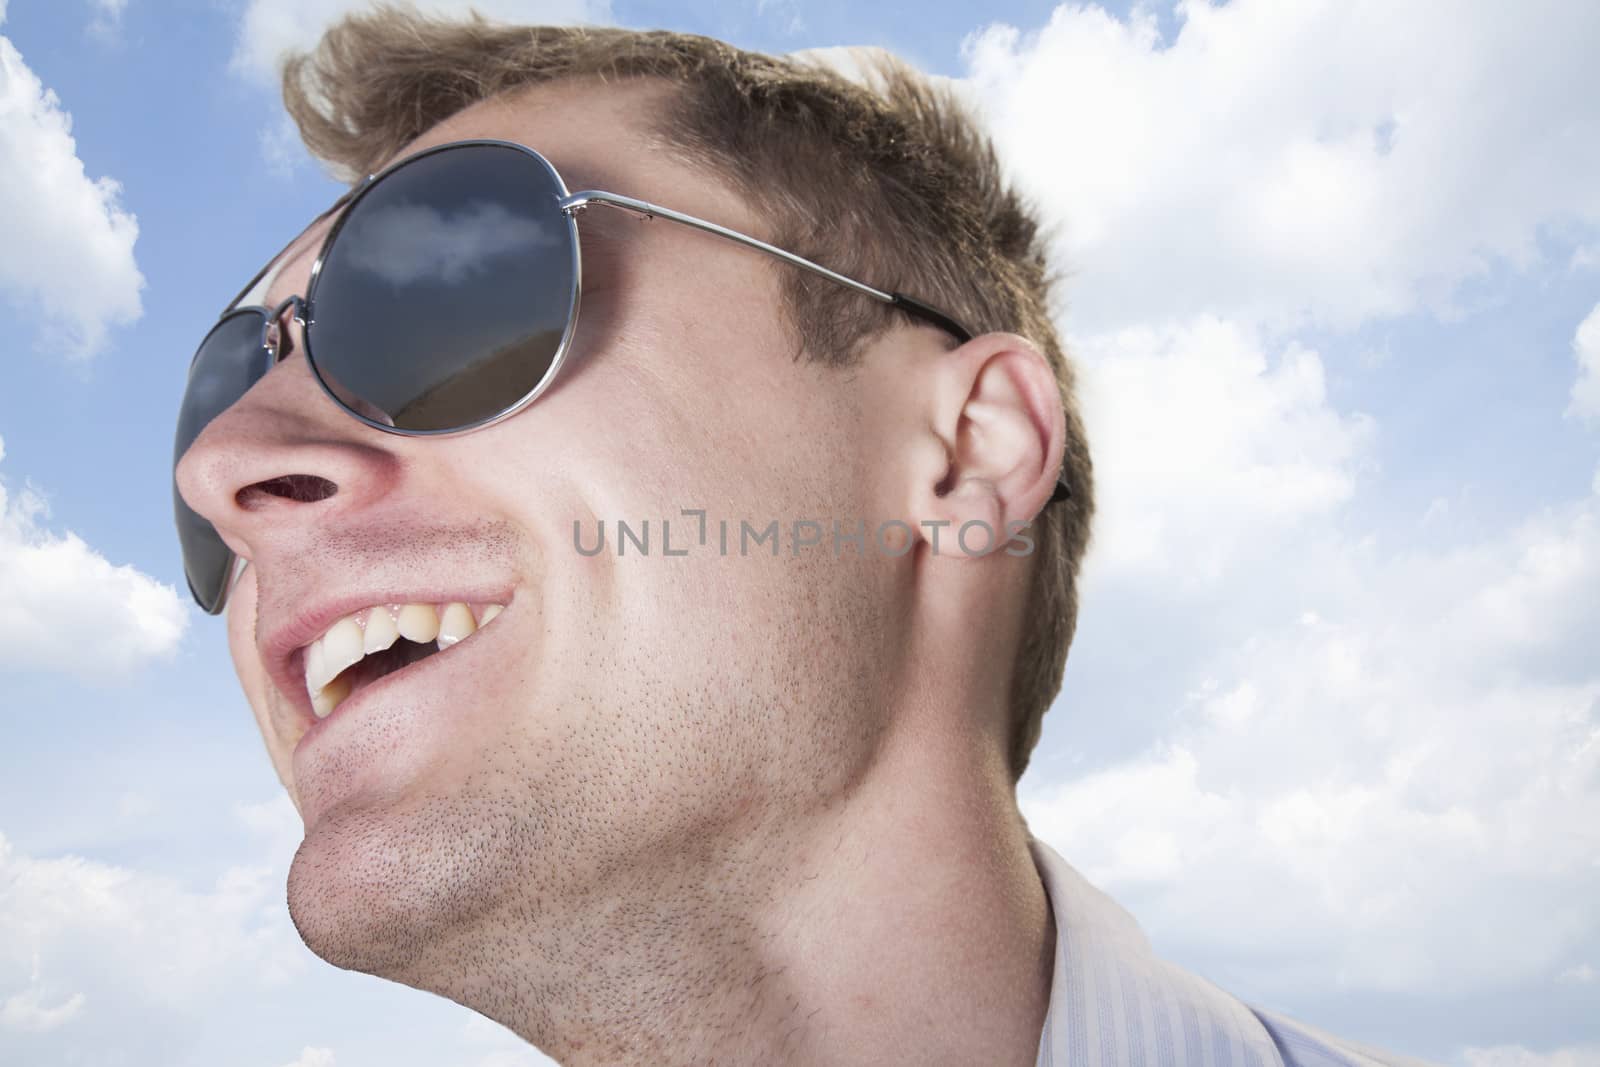 Portrait of young businessman in sunglasses smiling, close-up on face